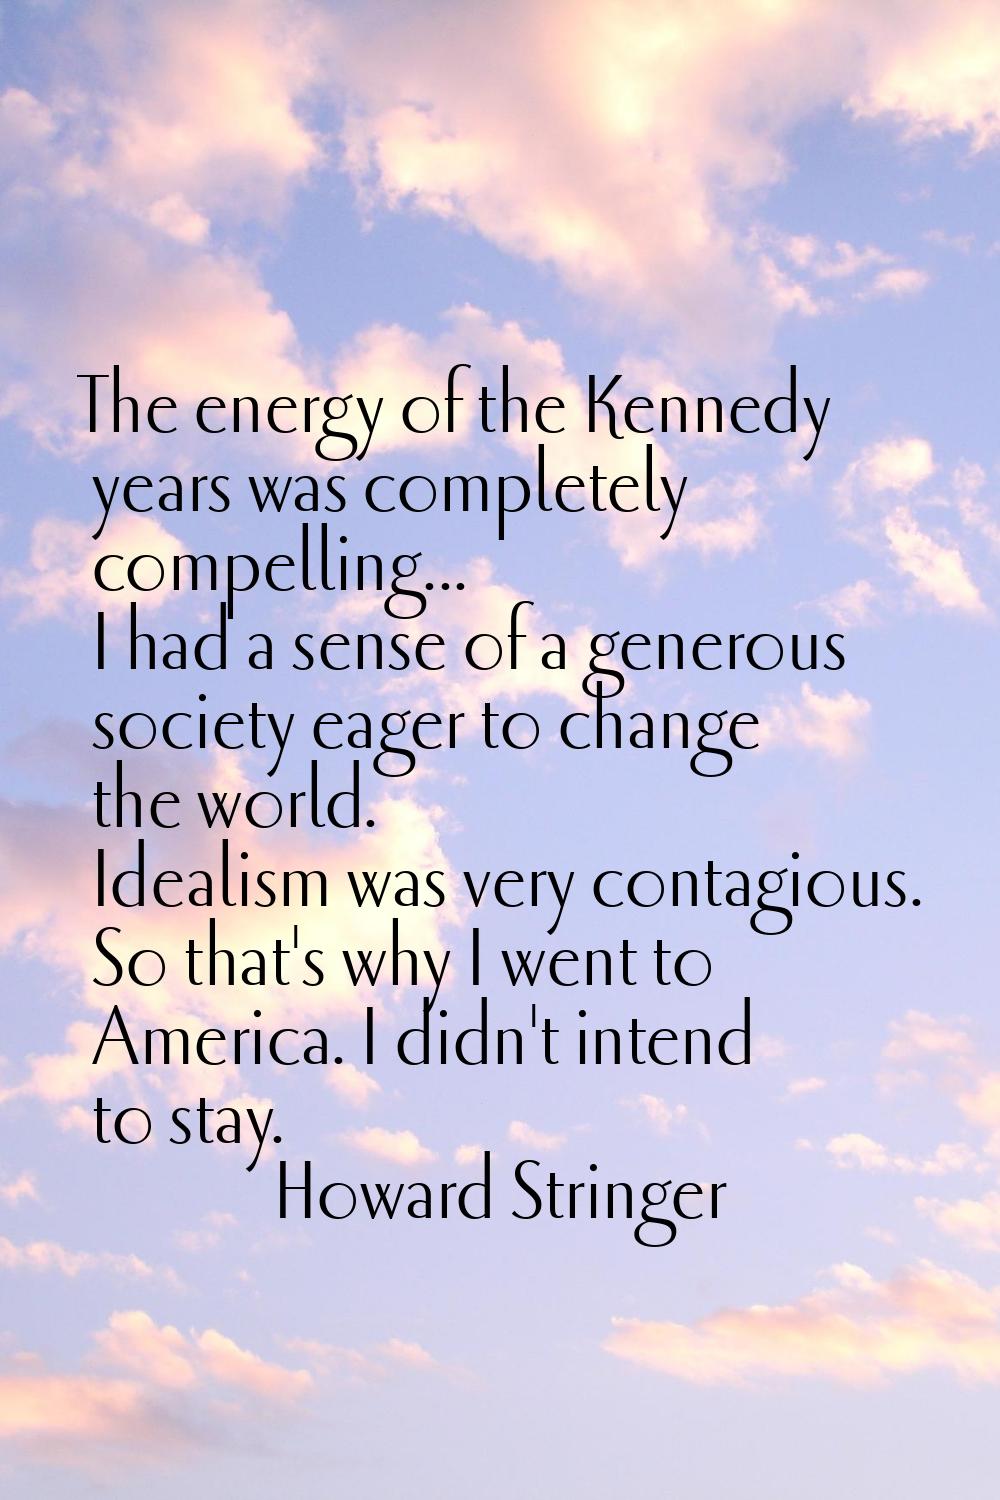 The energy of the Kennedy years was completely compelling... I had a sense of a generous society ea